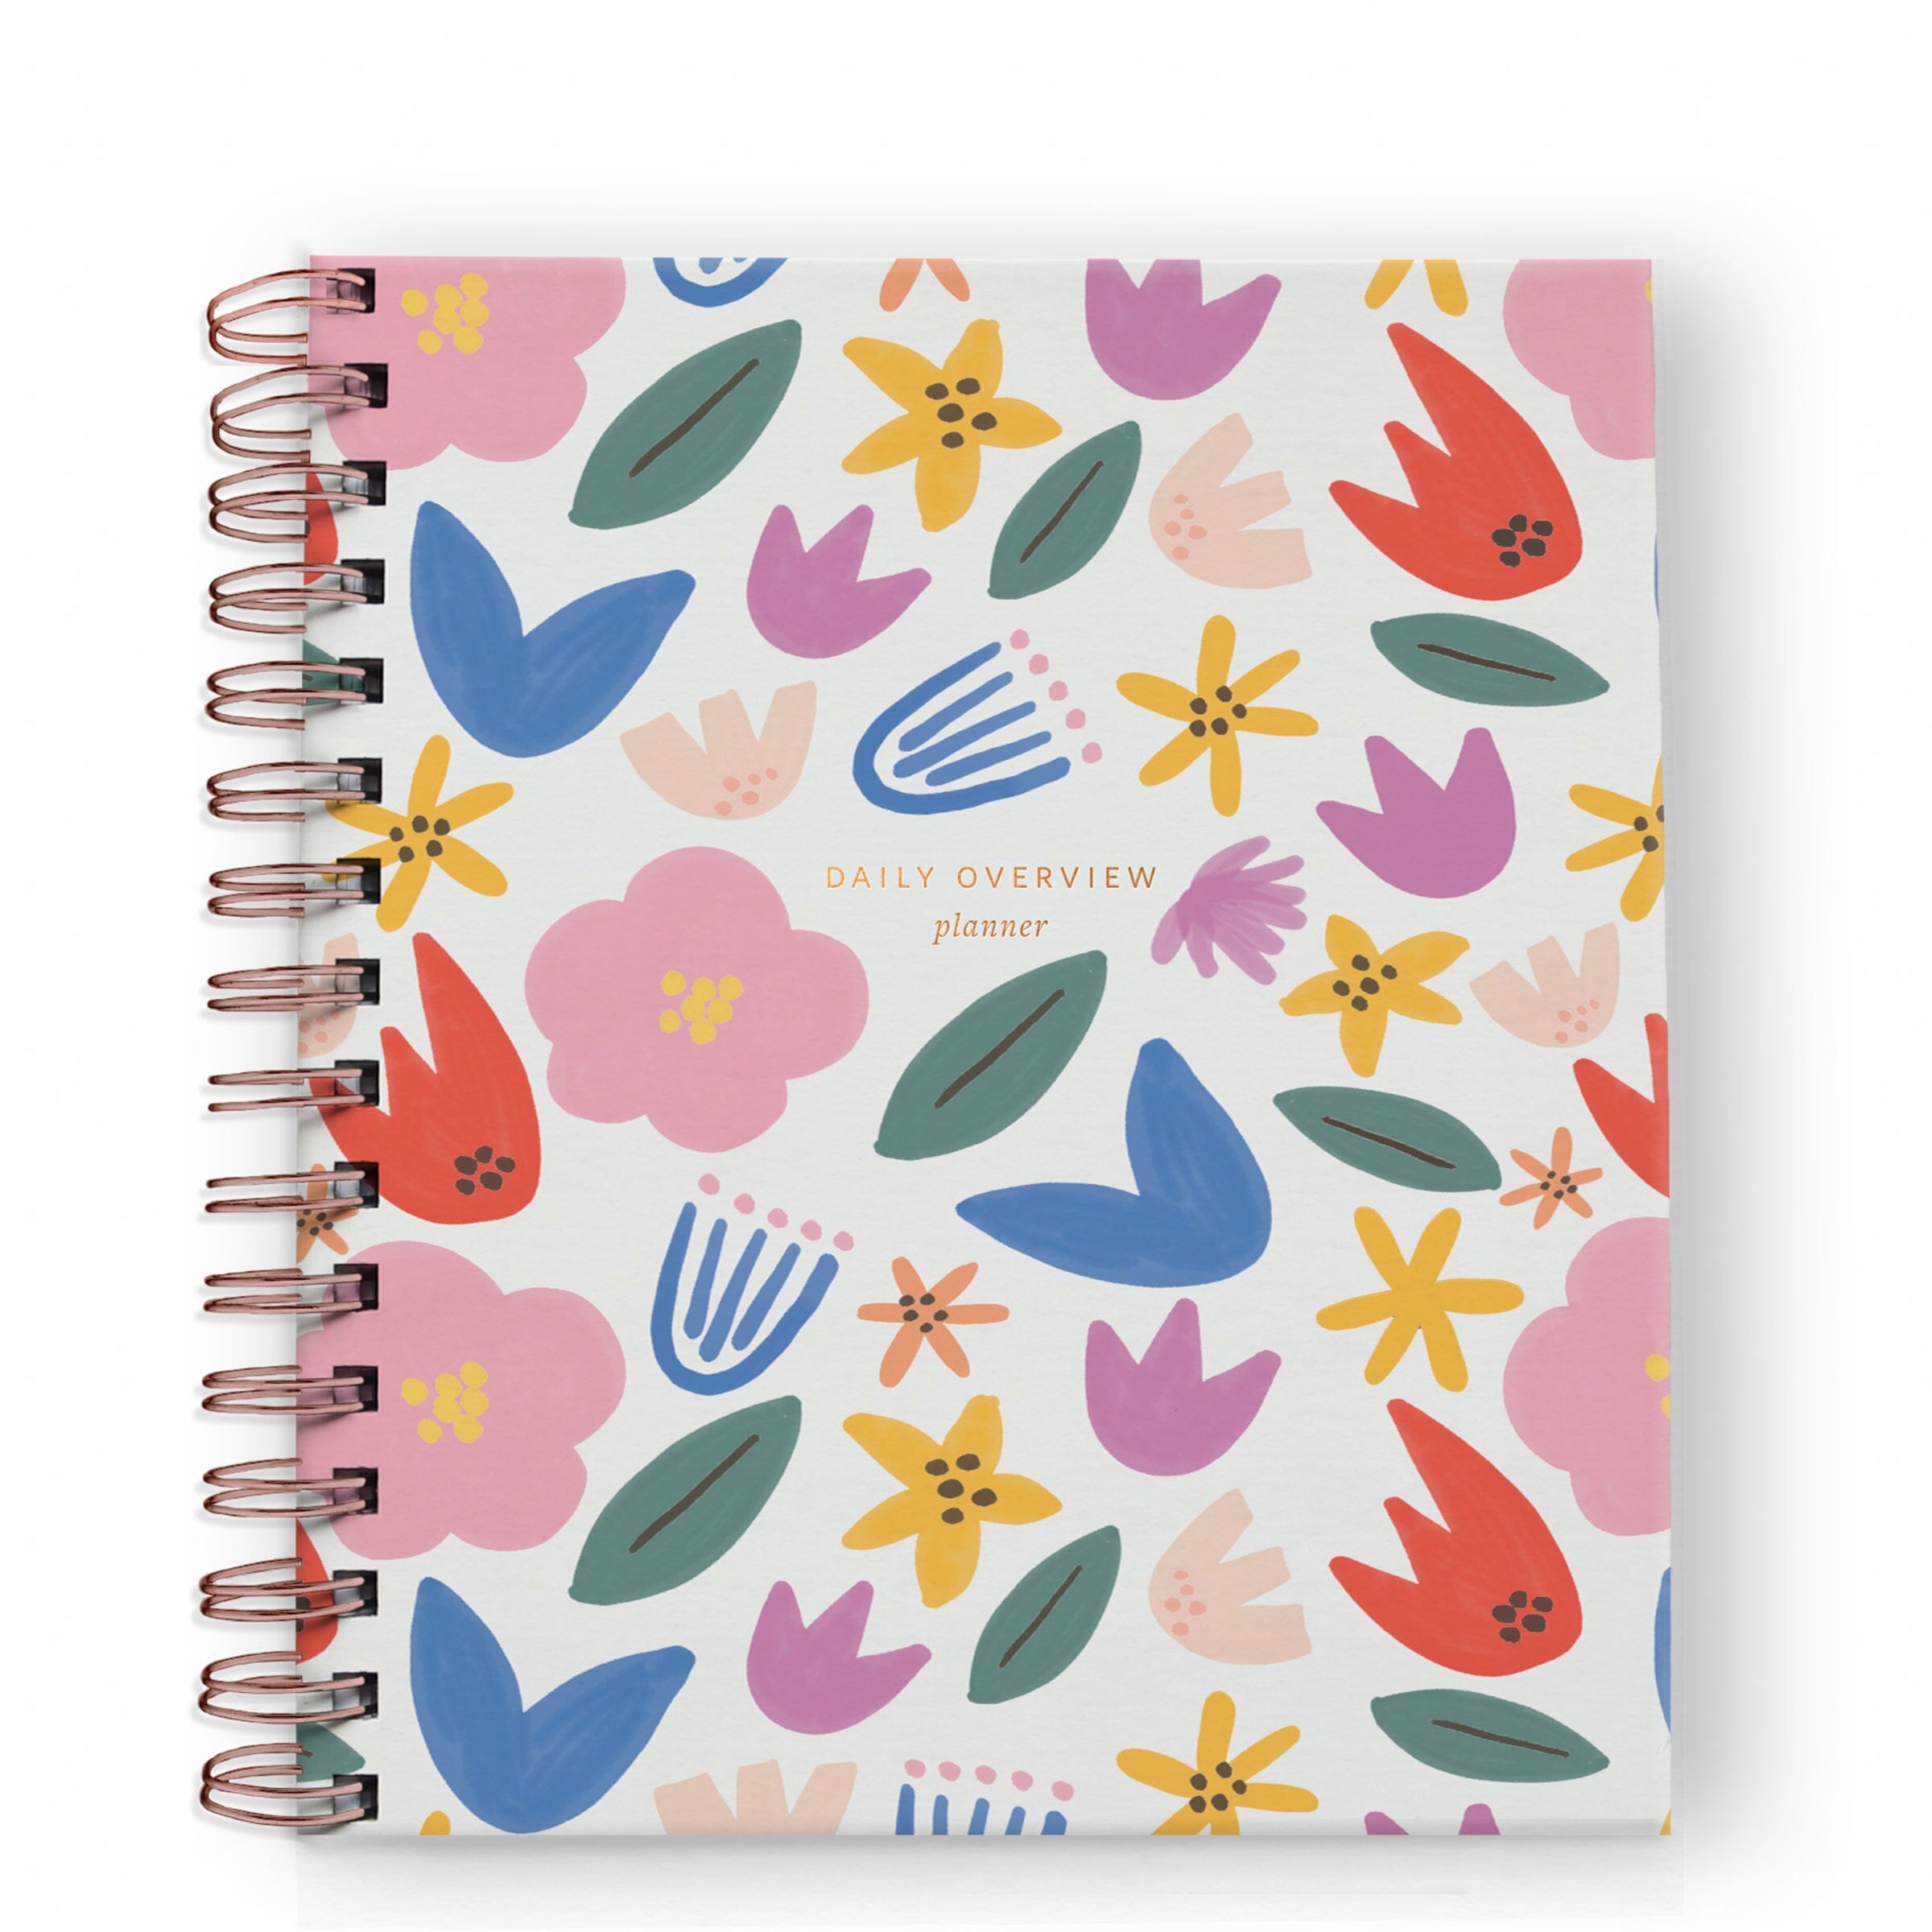 Sample Sale - Daily Overview Planner - Ramona & Ruth Floral Party 